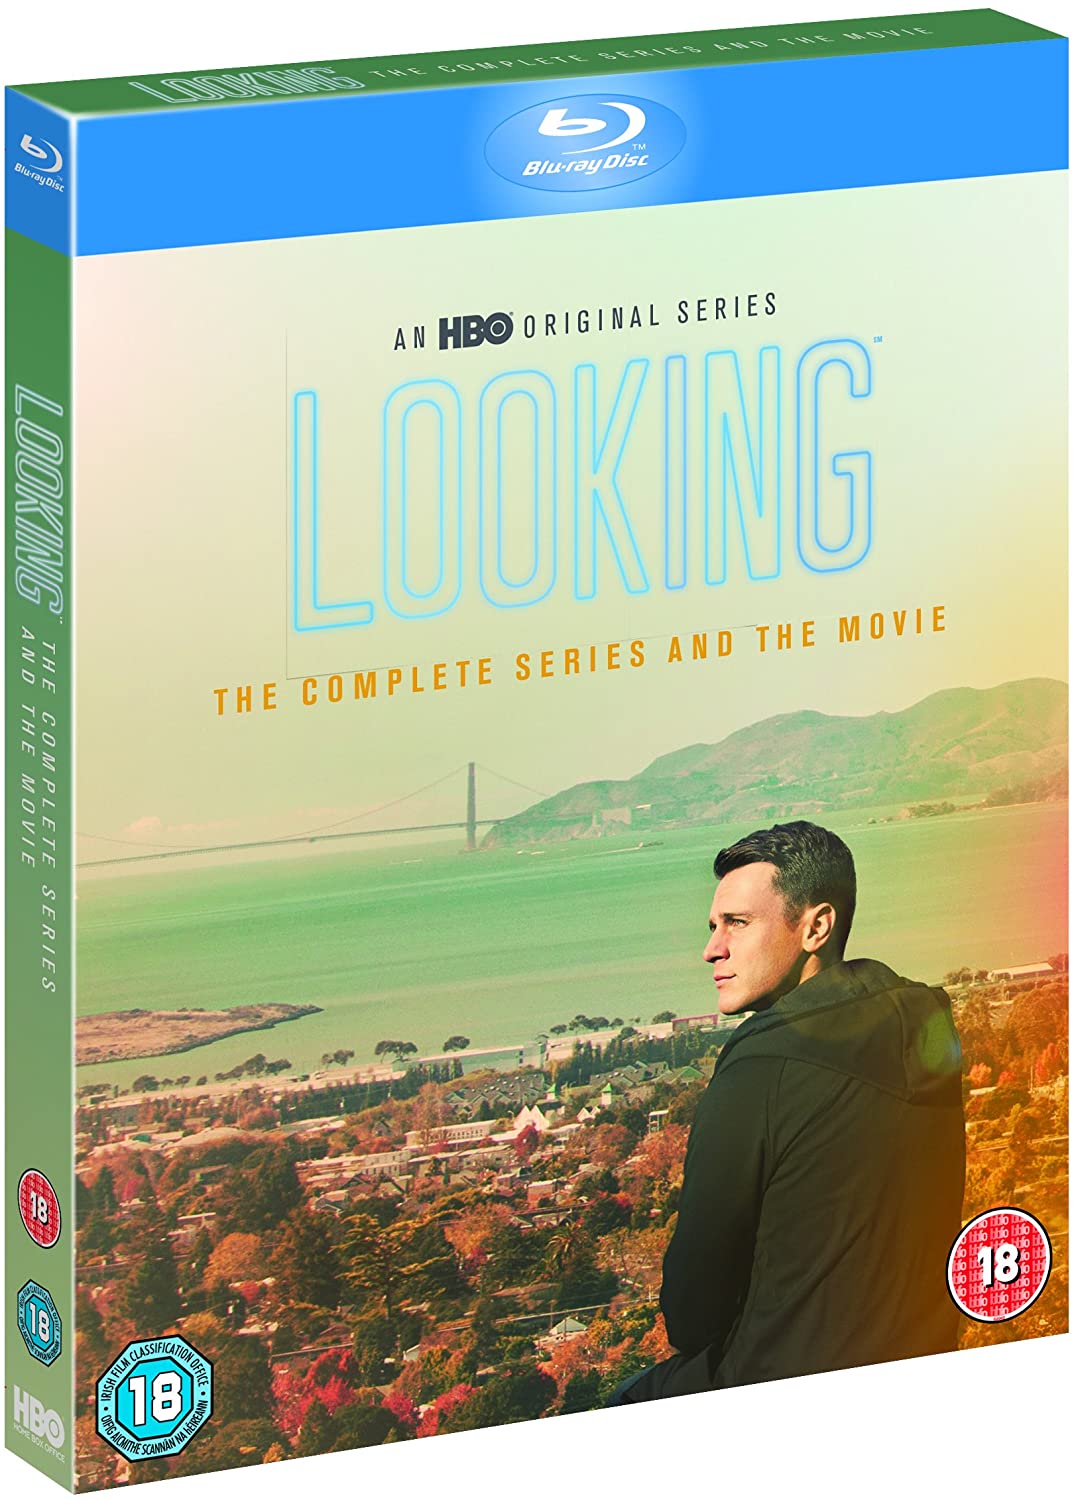 Looking: The Complete Series and The Movie [2016] [Region Free] - Comedy [Blu-ray]